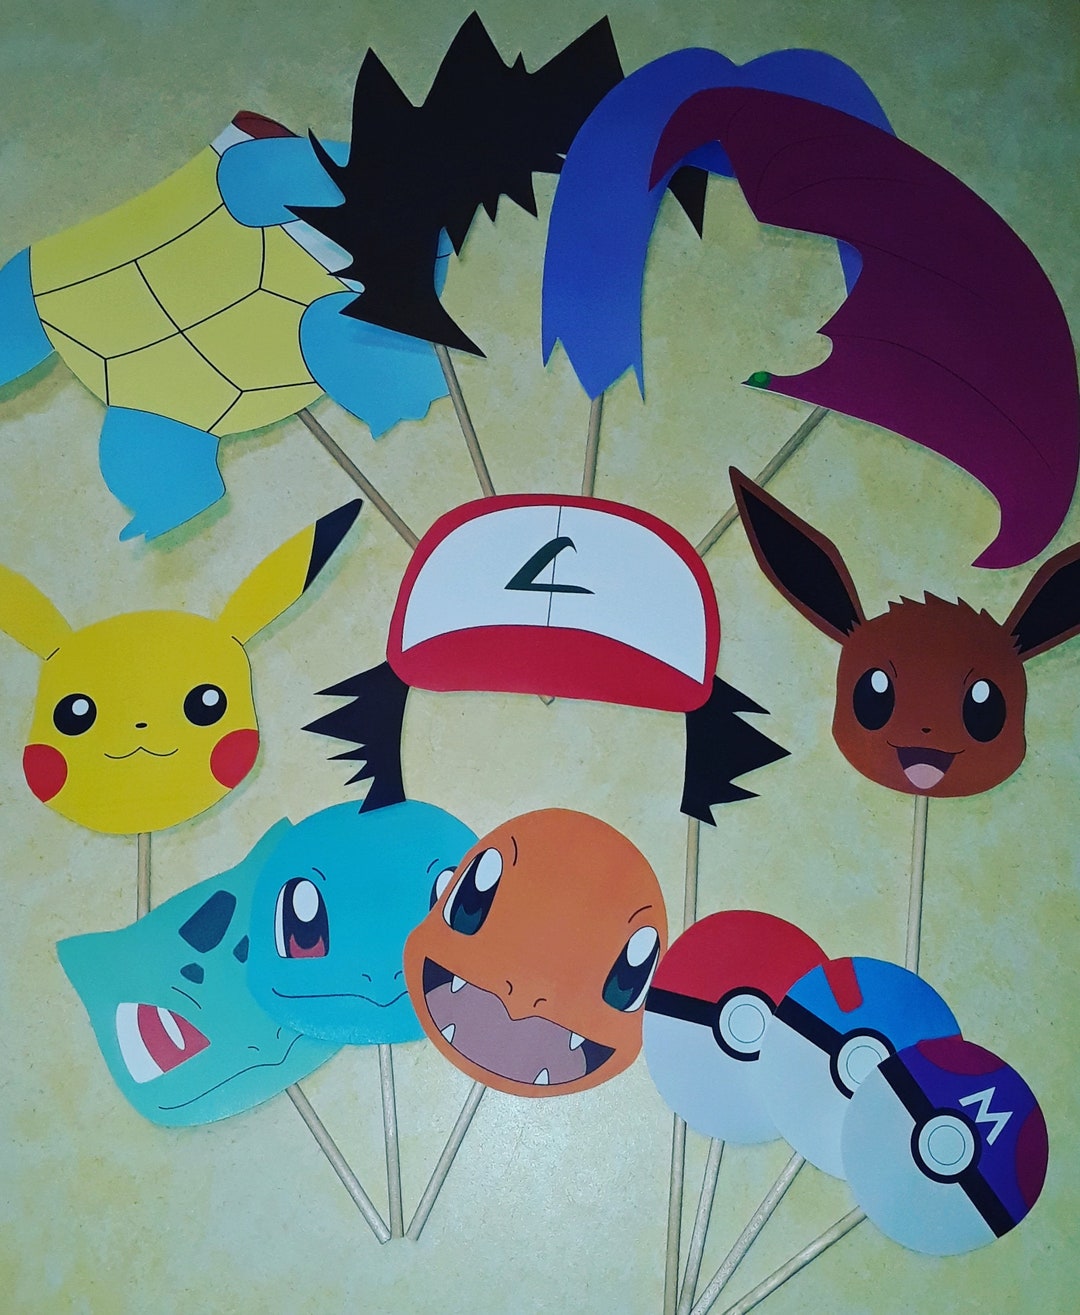 Pokemon Party Scene Setters Wall Decorating Kit with Props